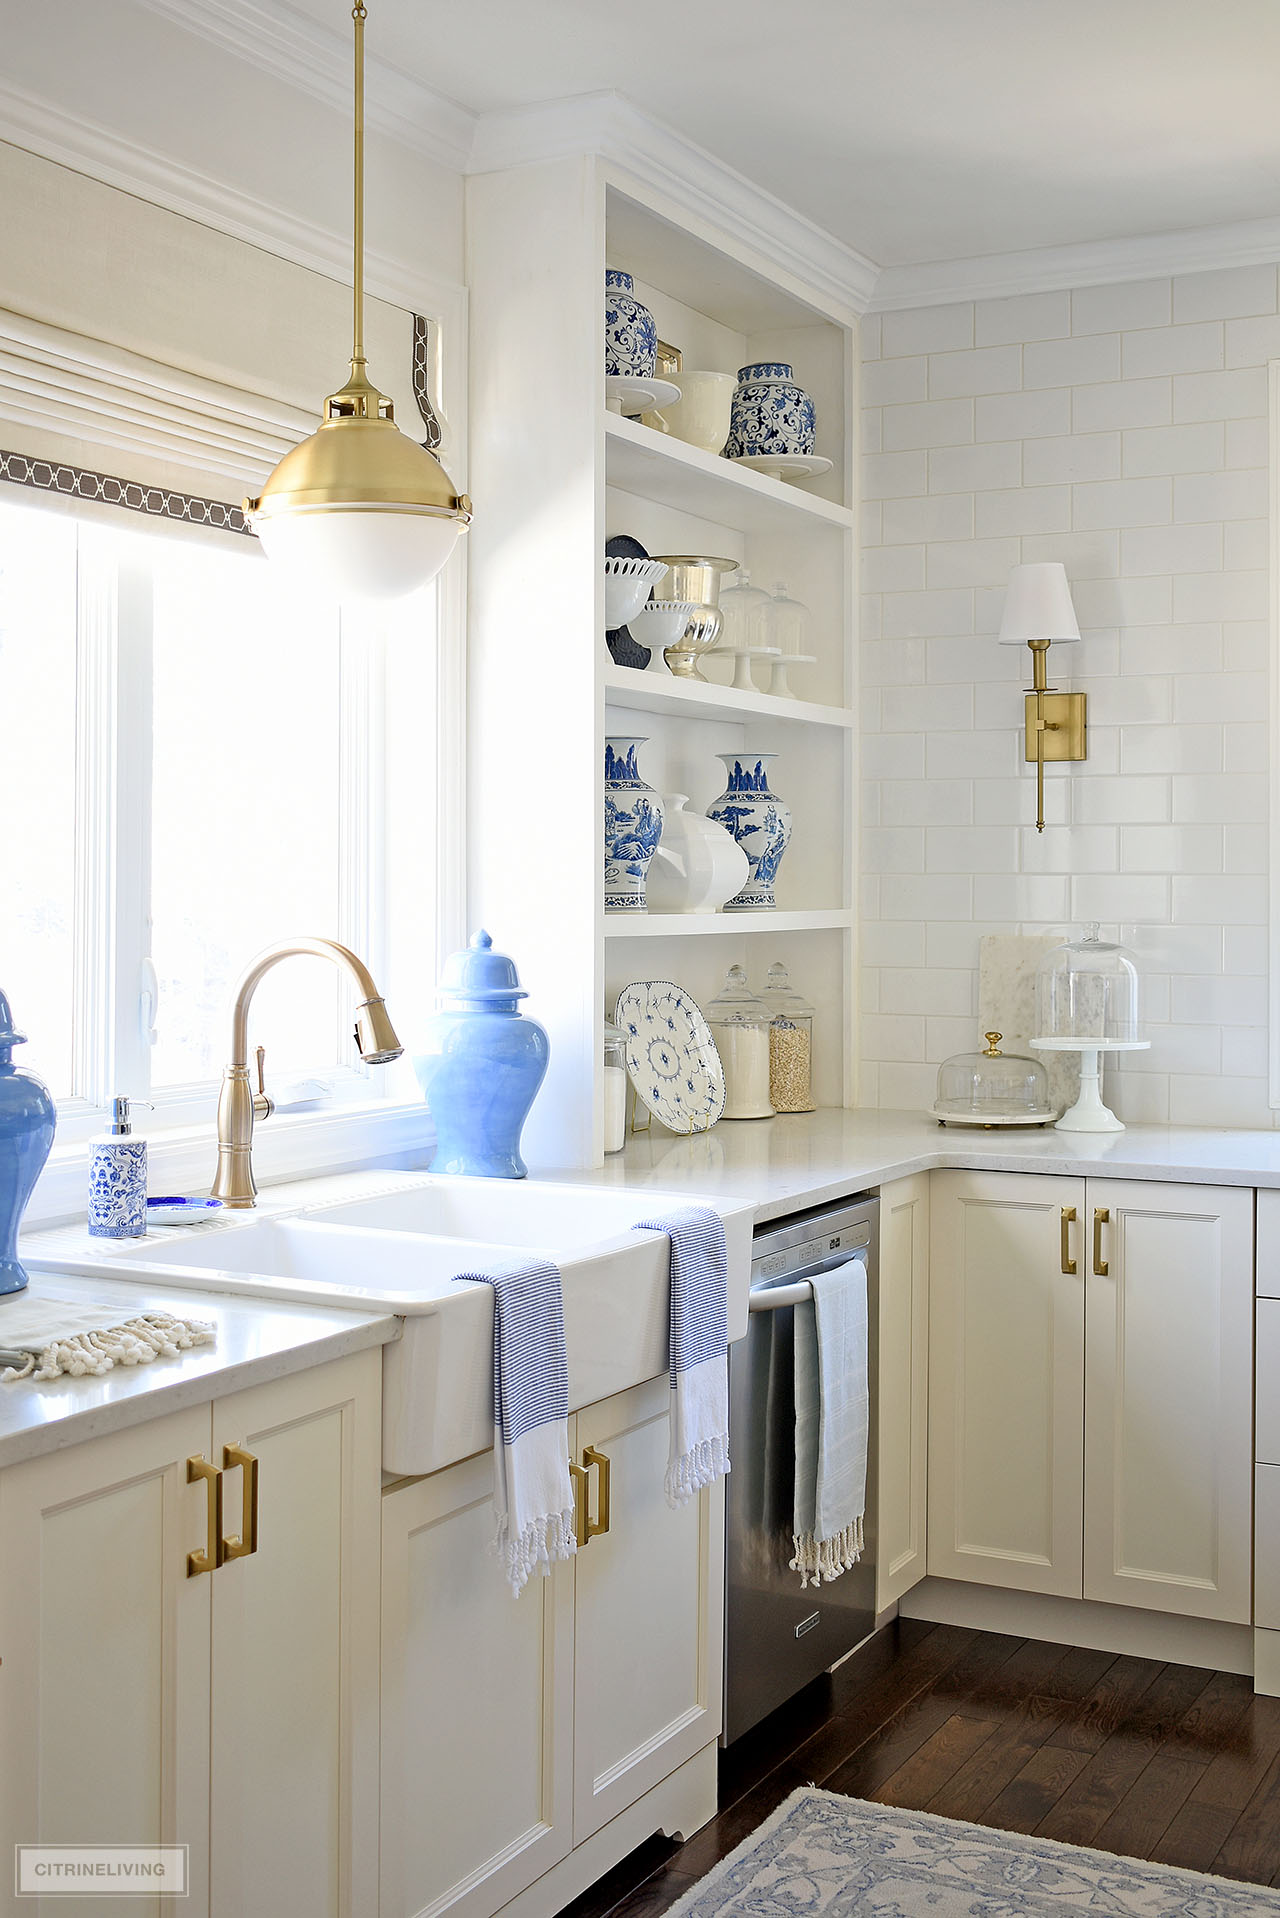 Kitchen sink and open shelving styled  for spring with beautiful blue and white ginger jars, vases and white and glass dishes and accessories.